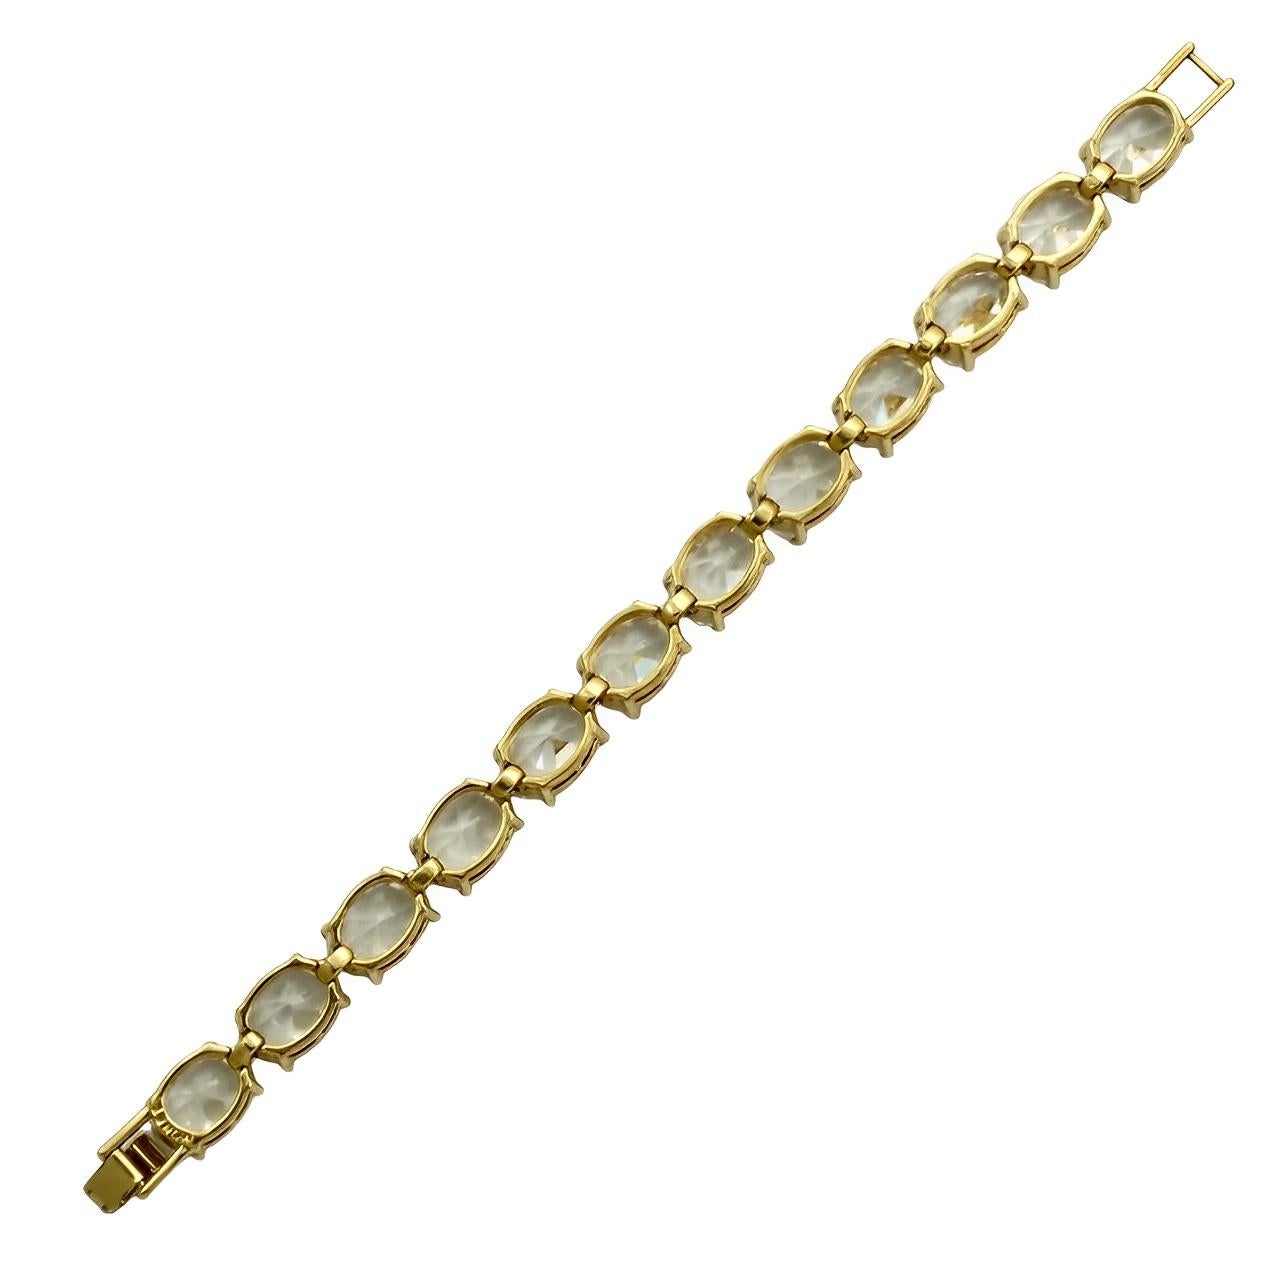 Monet Gold Plated and Large Clear Oval Rhinestone Link Bracelet For Sale 2